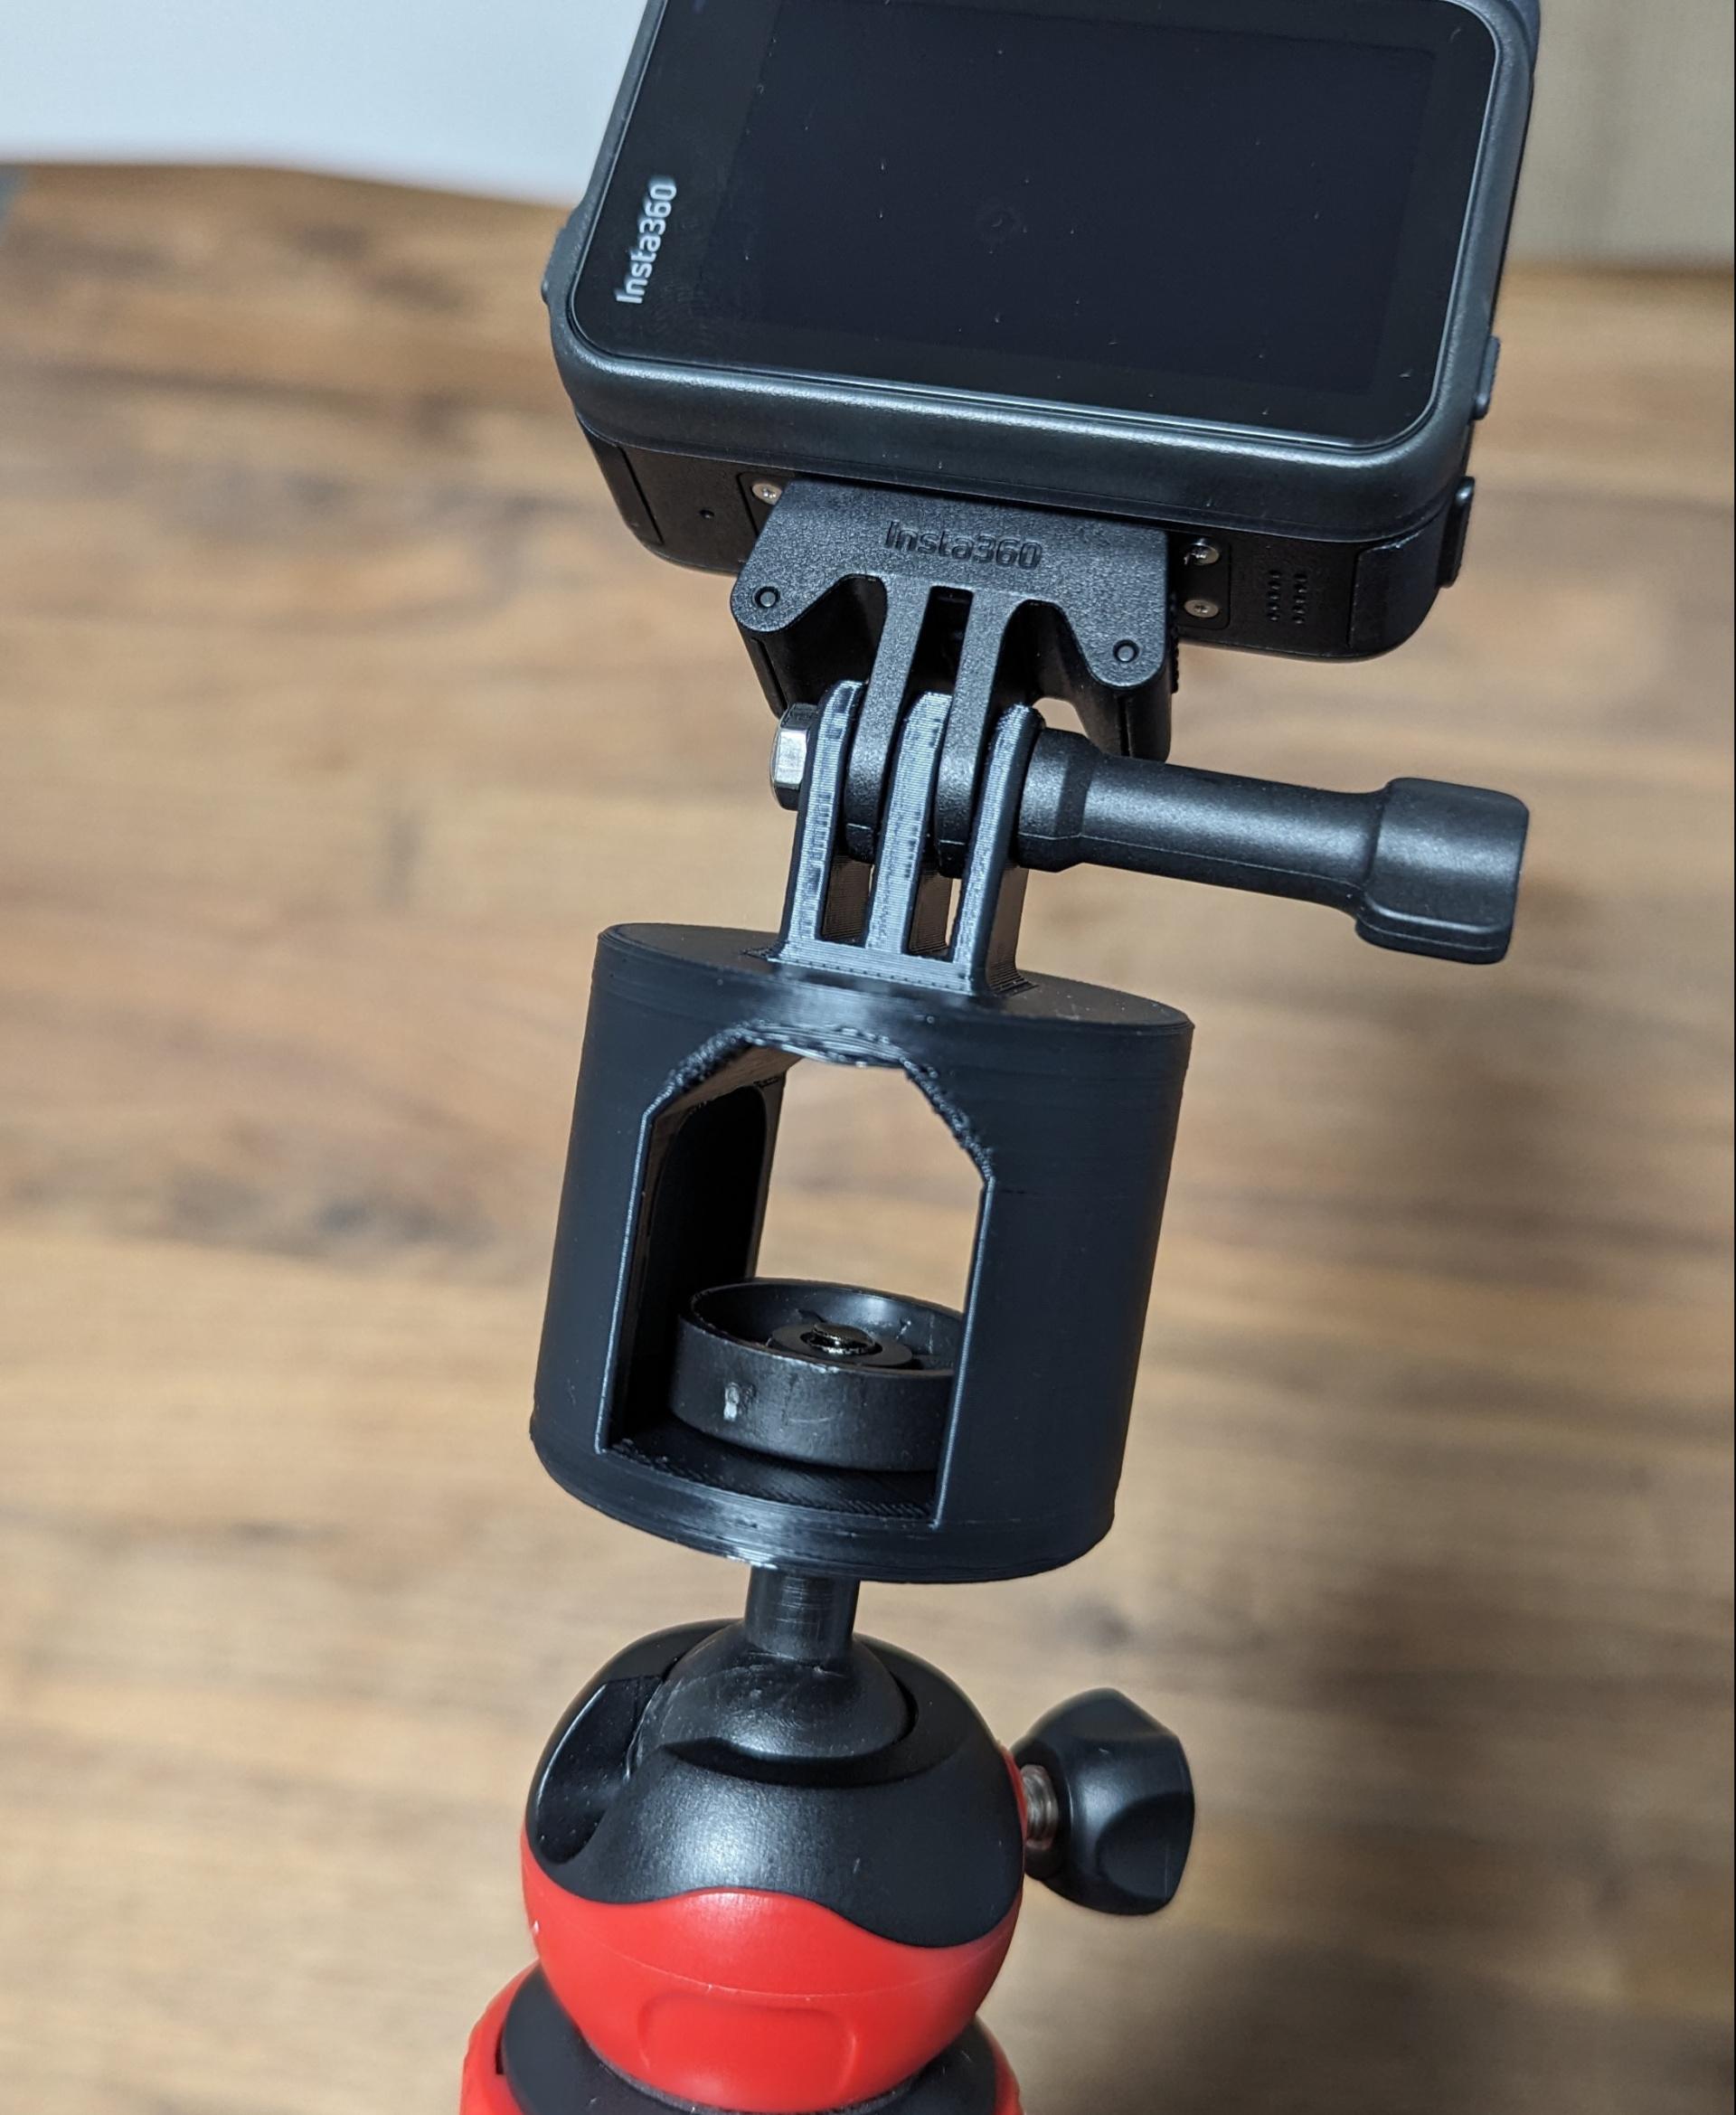 1/4" to Insta360 Mount - Mounted on a tripod using the included mounting disc upside-down instead of a 1/4" bolt.

This also uses the M5 x 0.8mm bolt that came with the official mount, along with an M5 nut that I purchased separately. The official mount and stand have an M5 nut that is glued in, so the nut cannot be used without breaking the included stand. - 3d model